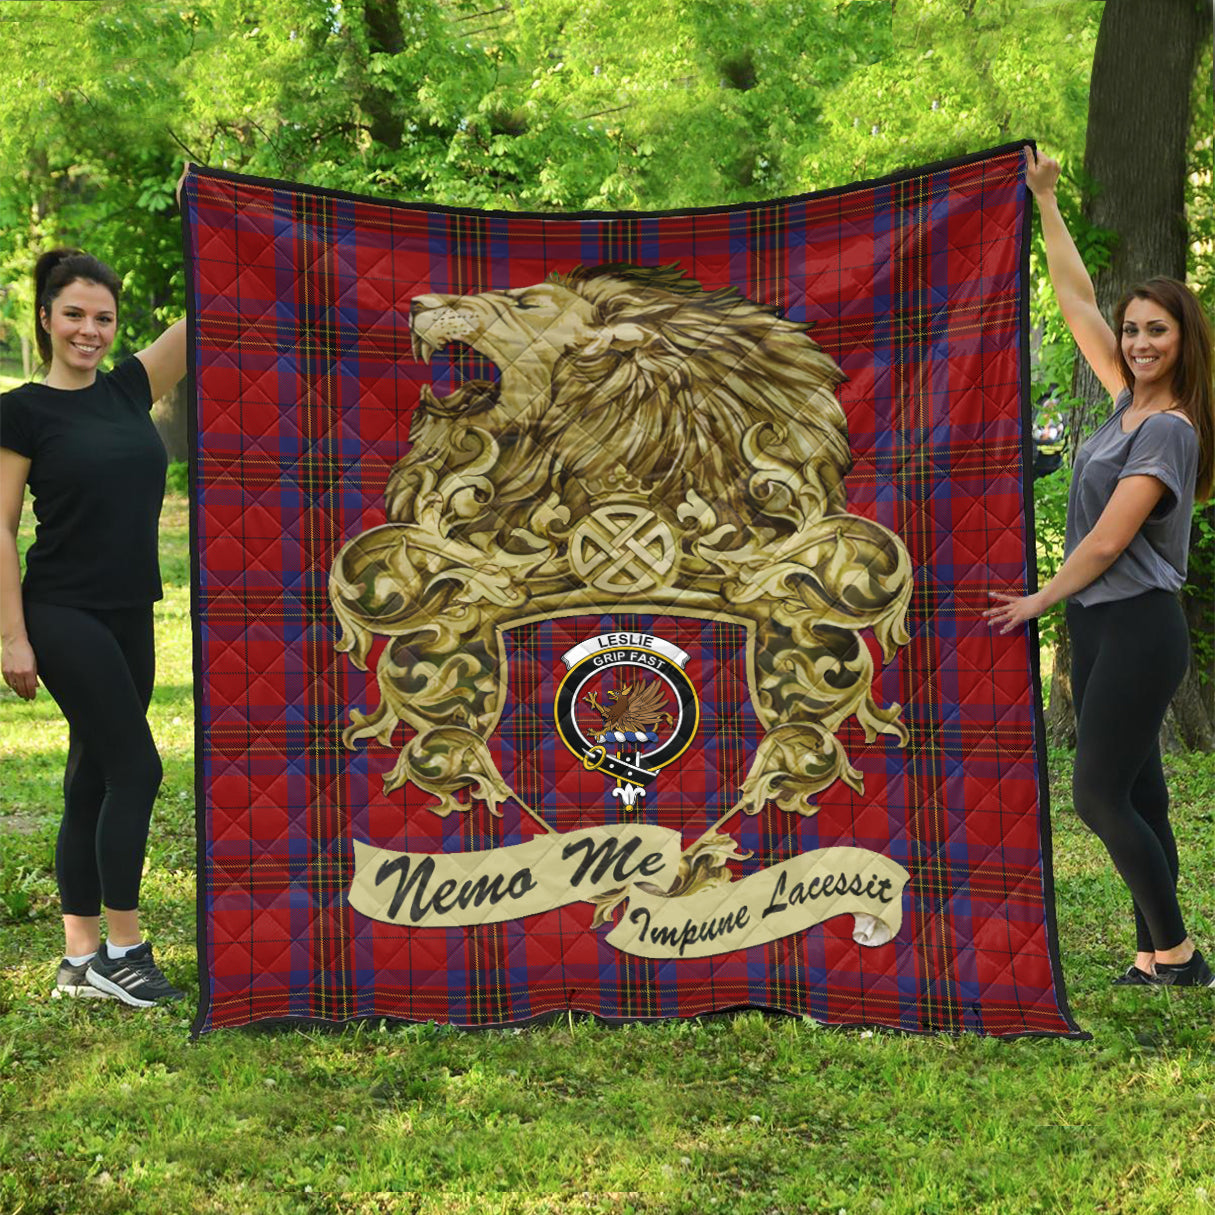 leslie-red-tartan-quilt-with-motto-nemo-me-impune-lacessit-with-vintage-lion-family-crest-tartan-quilt-pattern-scottish-tartan-plaid-quilt-vintage-style